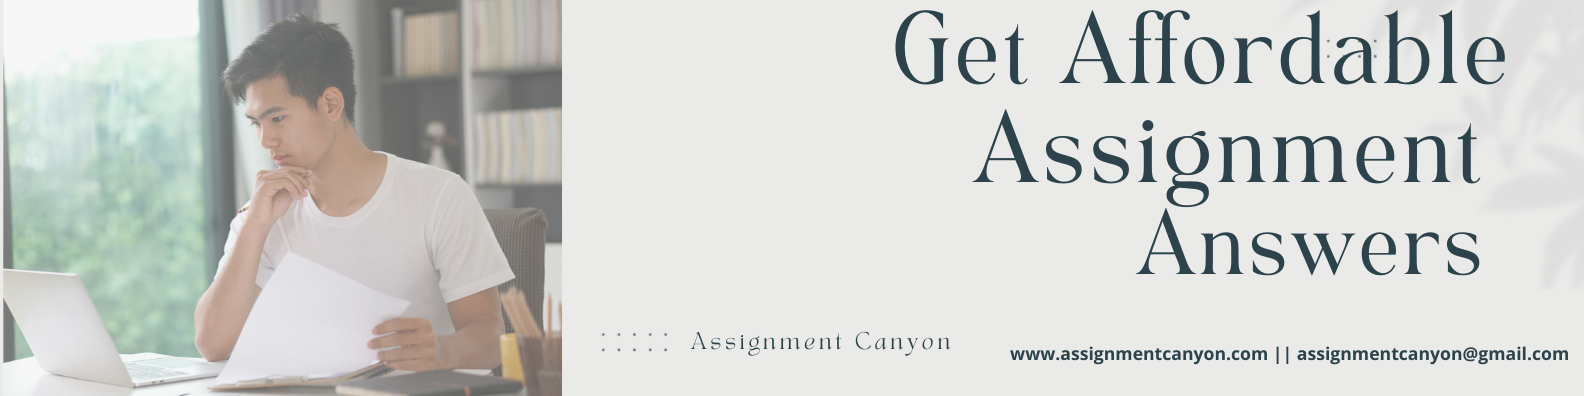 Get Affordable Assignment Answers from Assignment Canyon at 13.50 USD per page